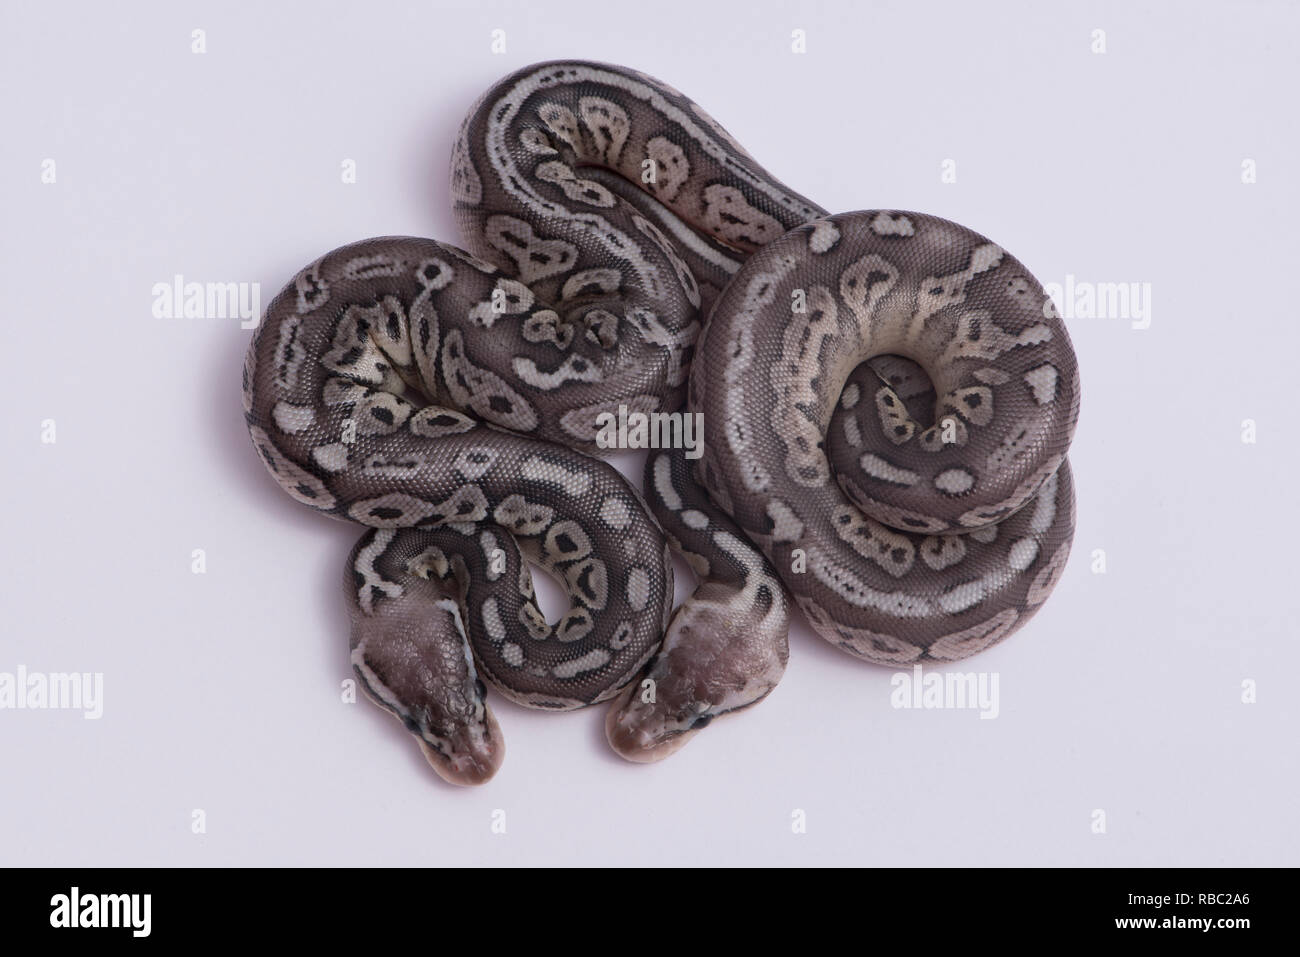 Baby pewter ball pythons Stock Photo